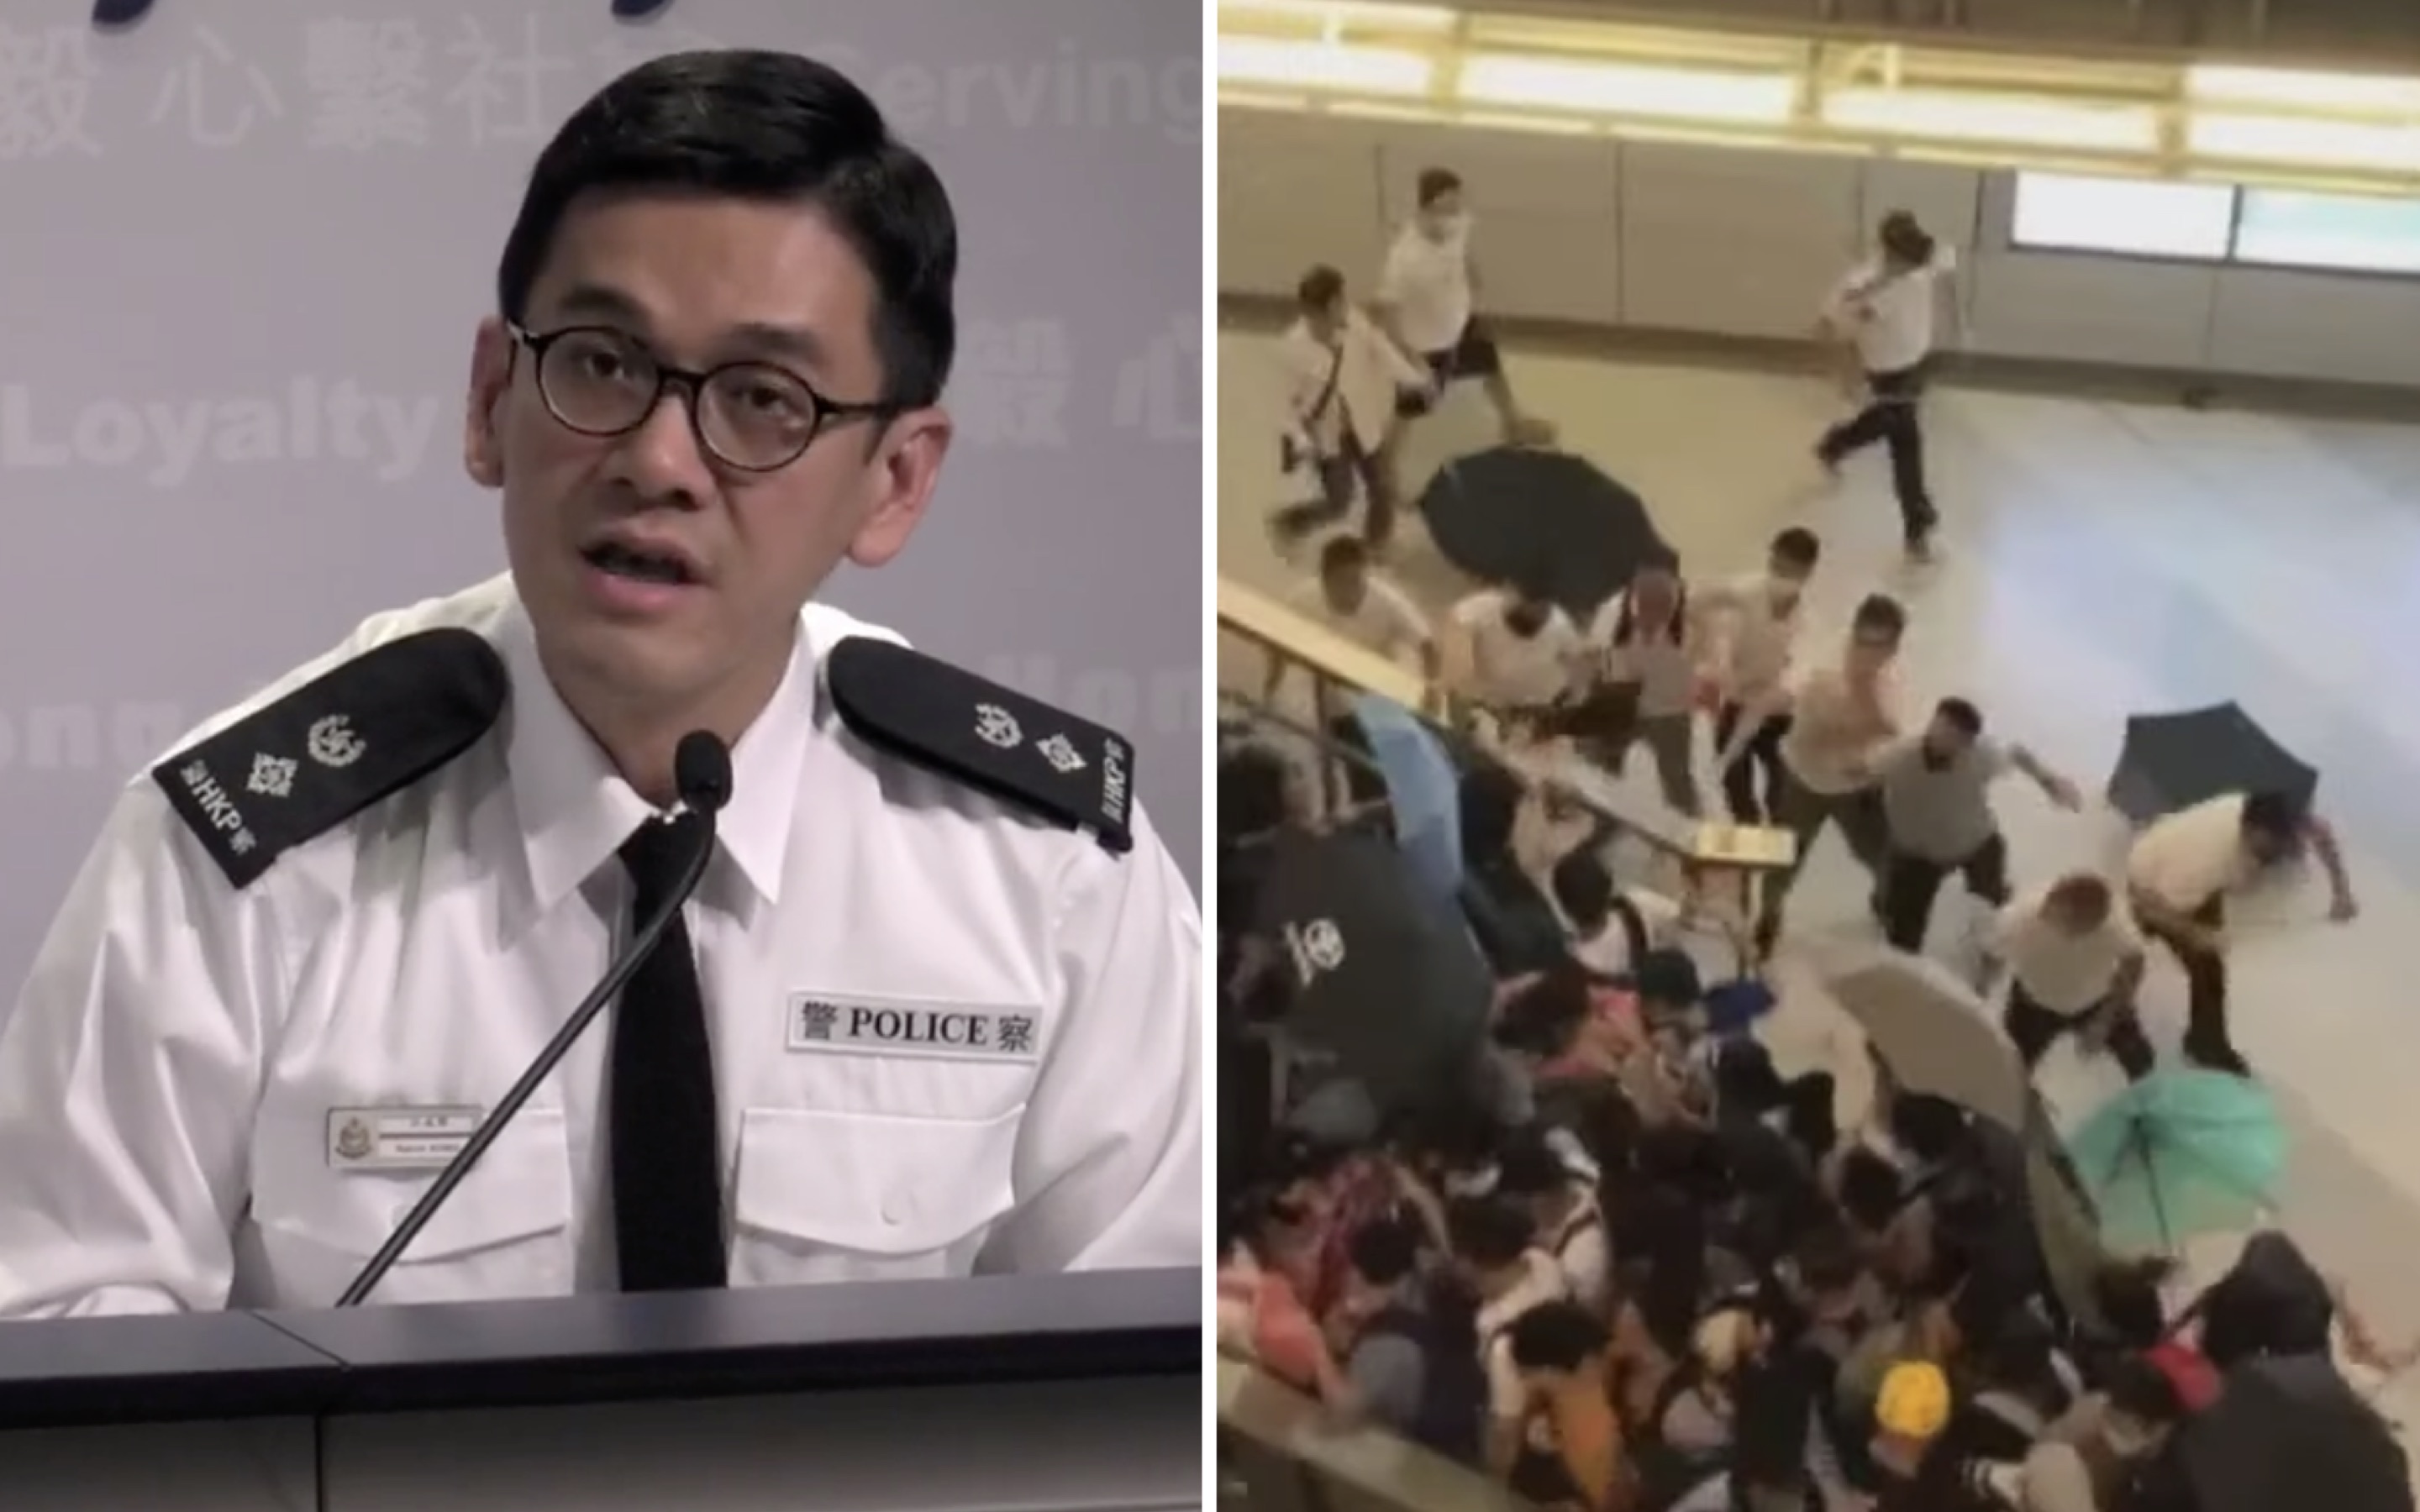 Police spokesperson Kong Wing-cheung addresses comments he made during a TV interview where he commented that protesters were to blame for a violent clash at Yuen Long MTR station in July. Screengrabs via Facebook video/YouTube.